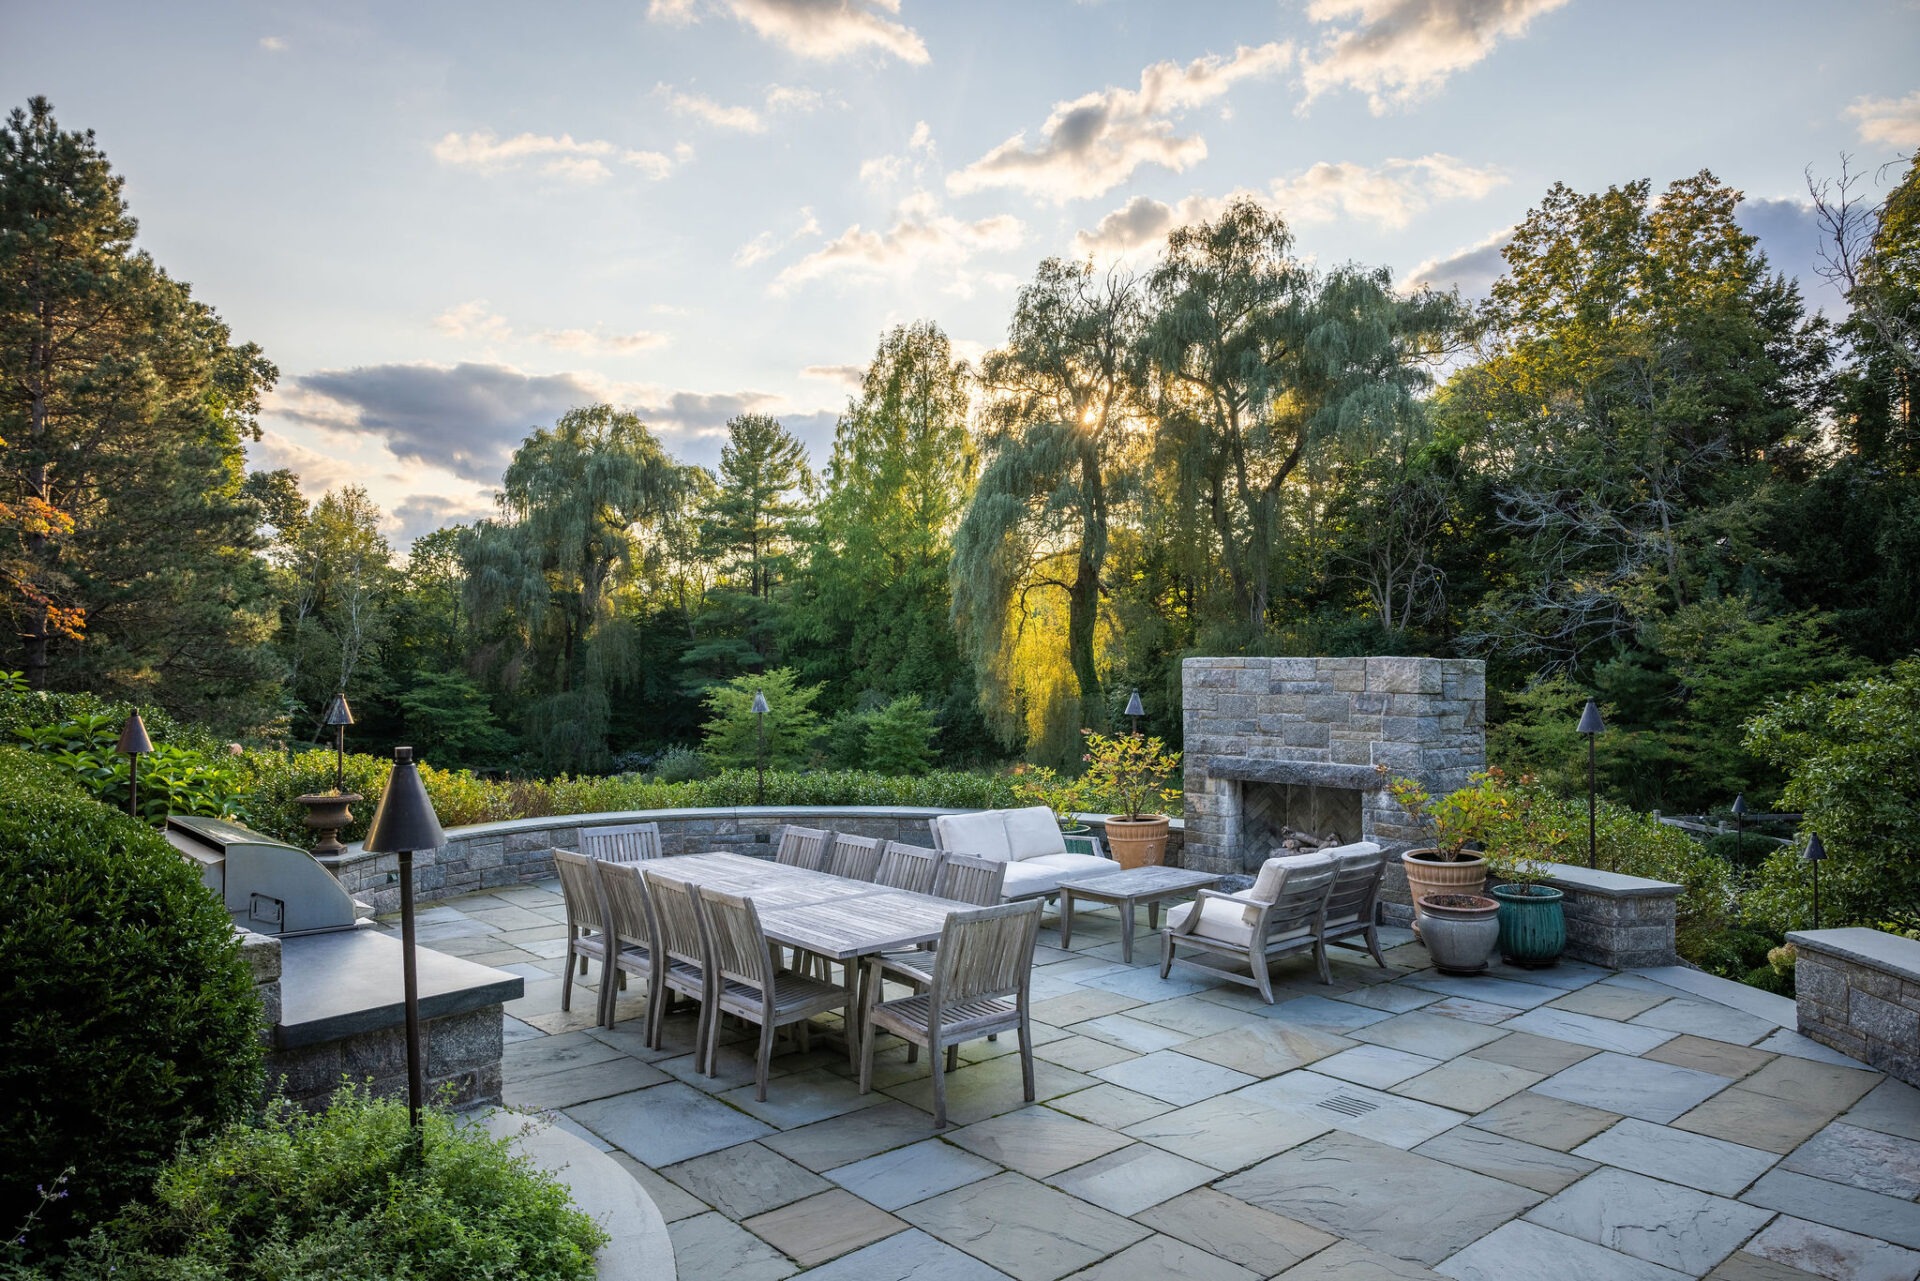 An elegant outdoor patio space with dining furniture and a fireplace, set against a backdrop of lush trees and a sunset sky.